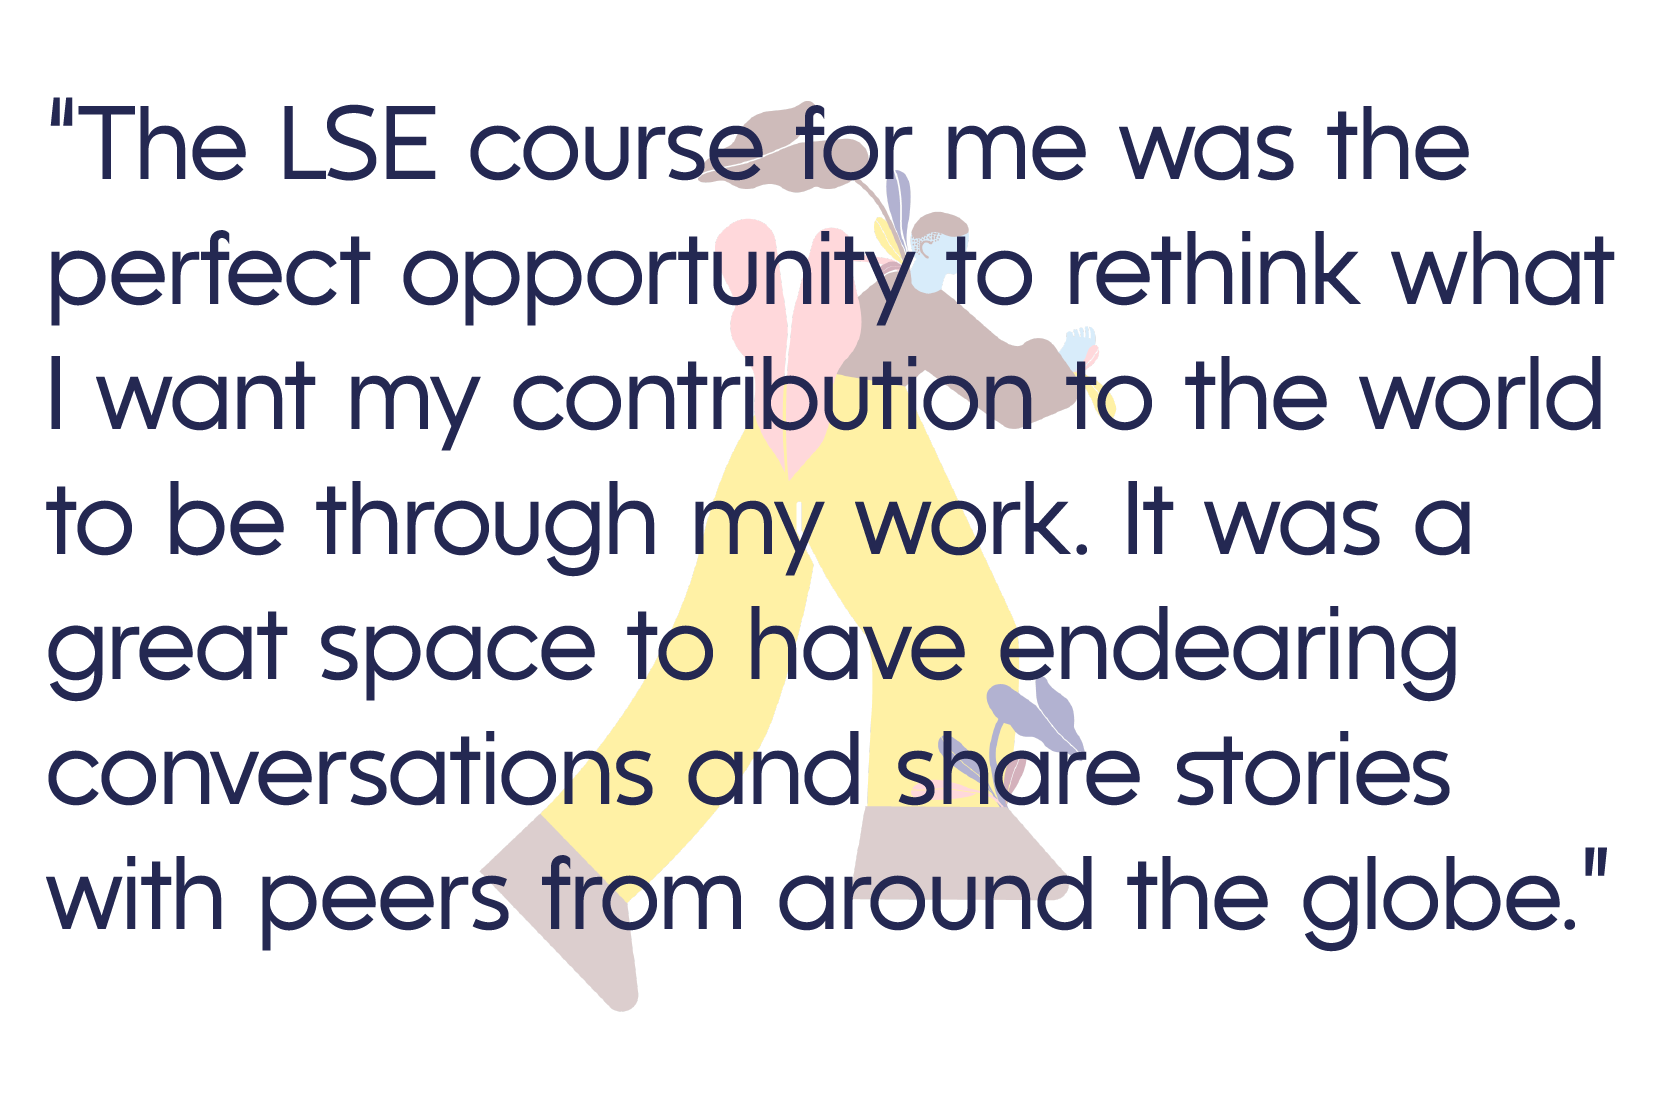 “The LSE course for me was the perfect opportunity to rethink what I want my contribution to the world to be through my work. It was a great space to have endearing conversations and share stories with peers from around the globe.”